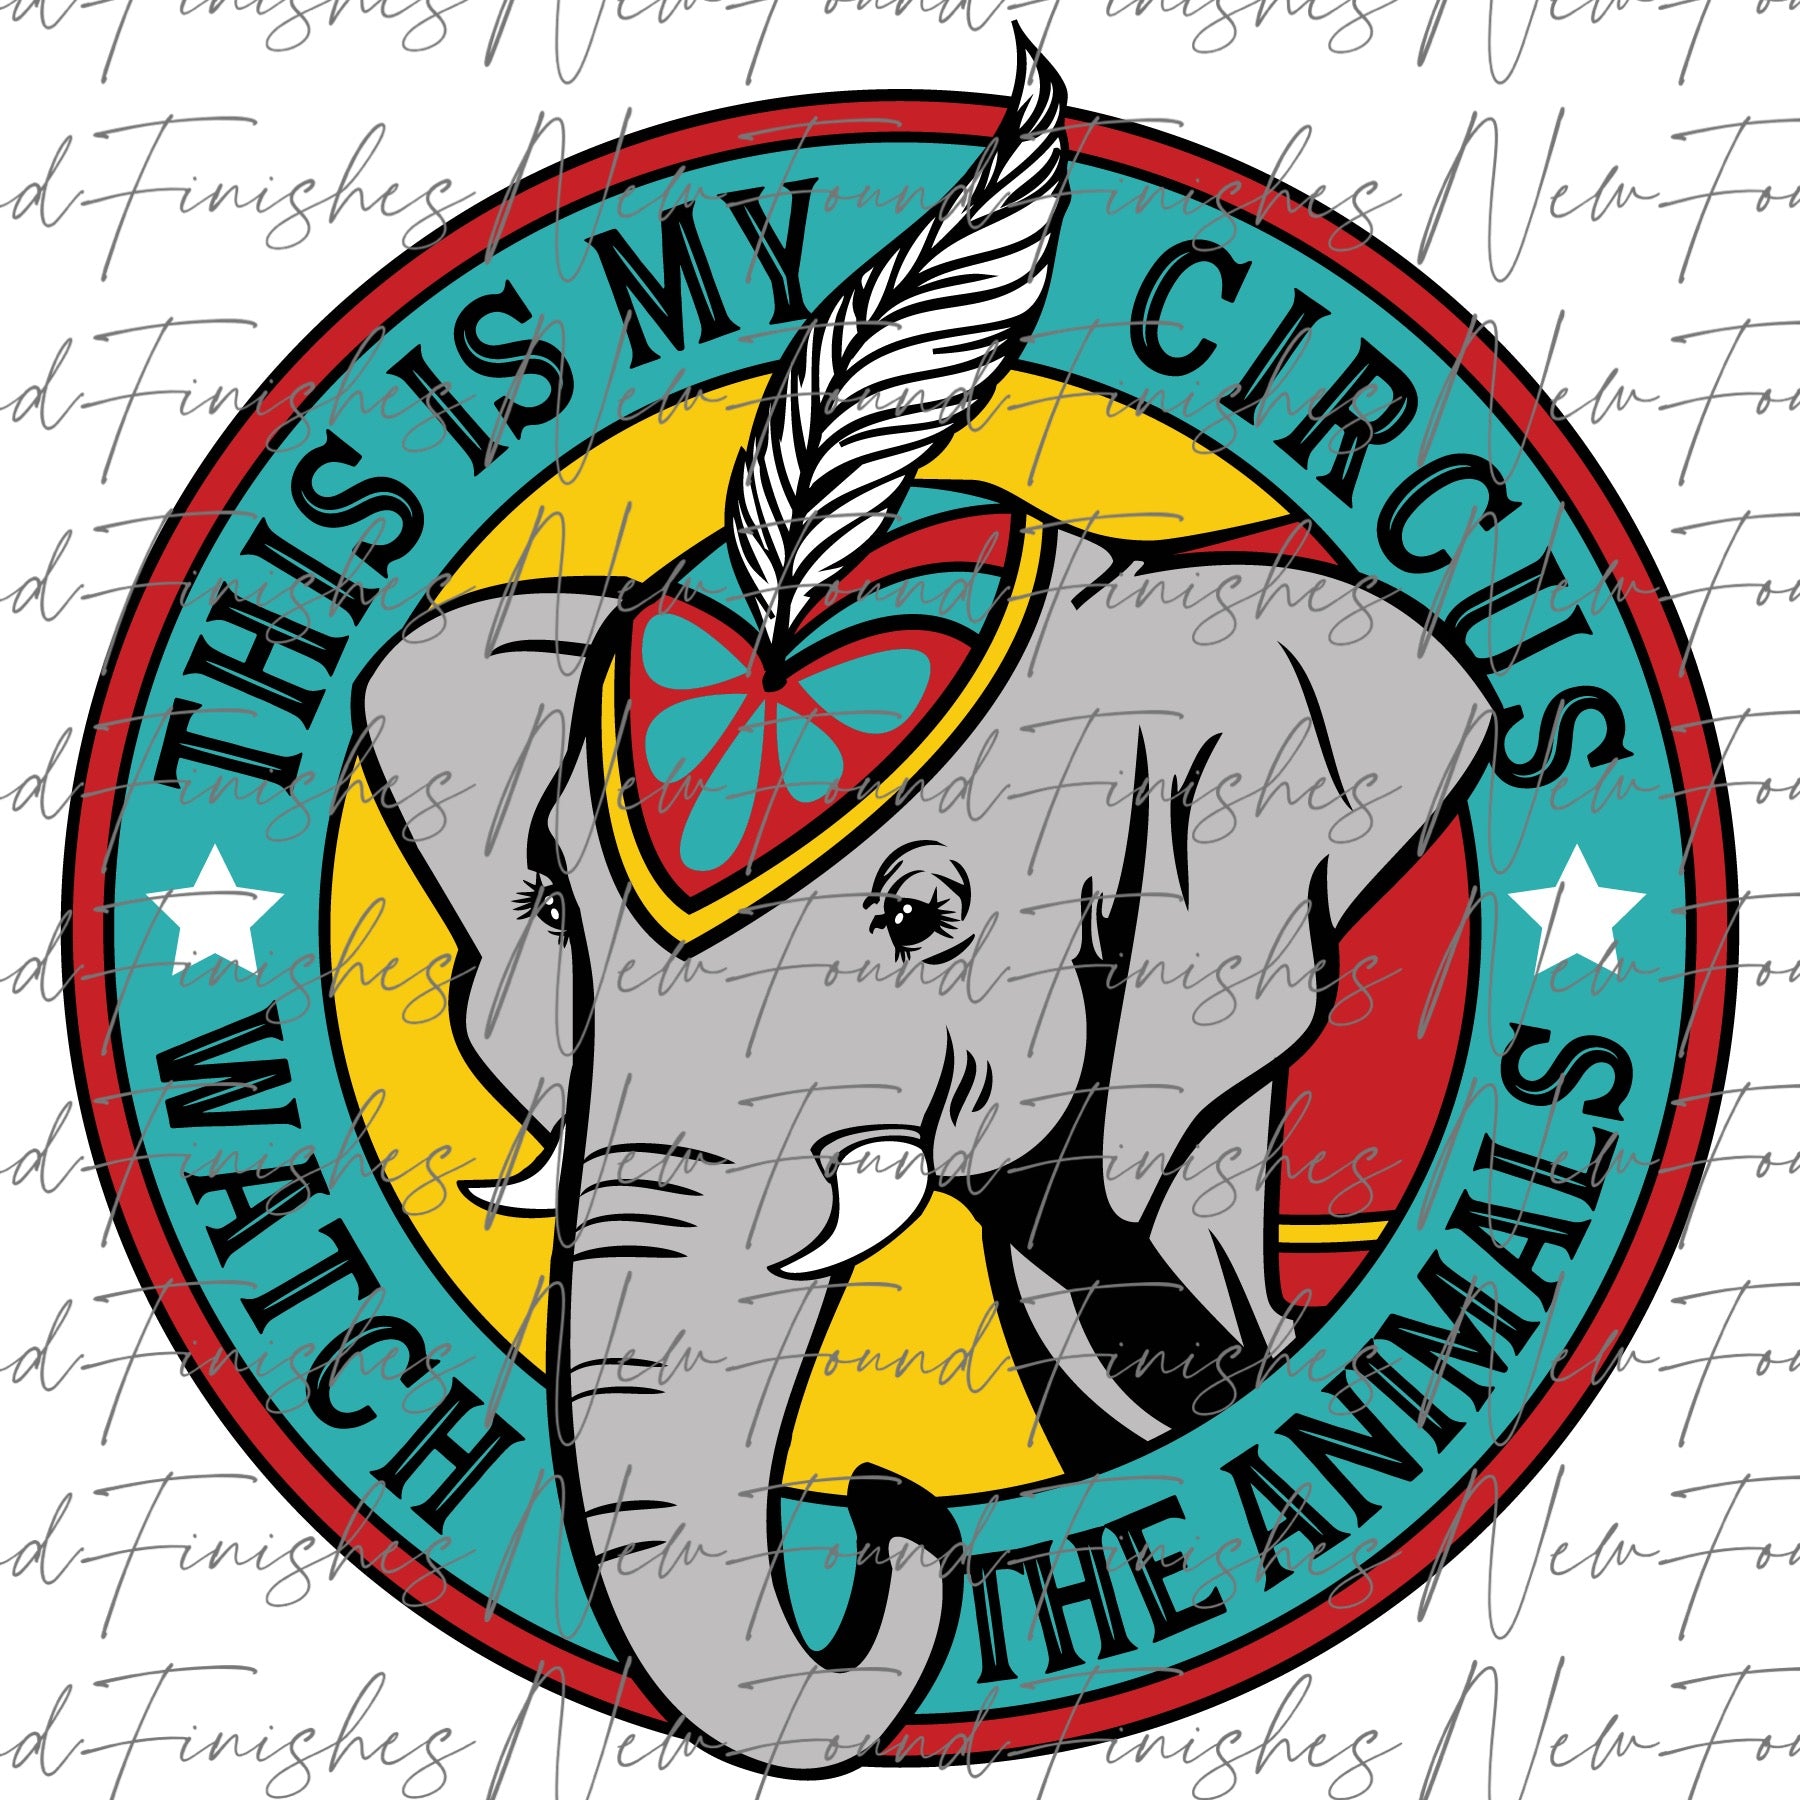 This is my circus